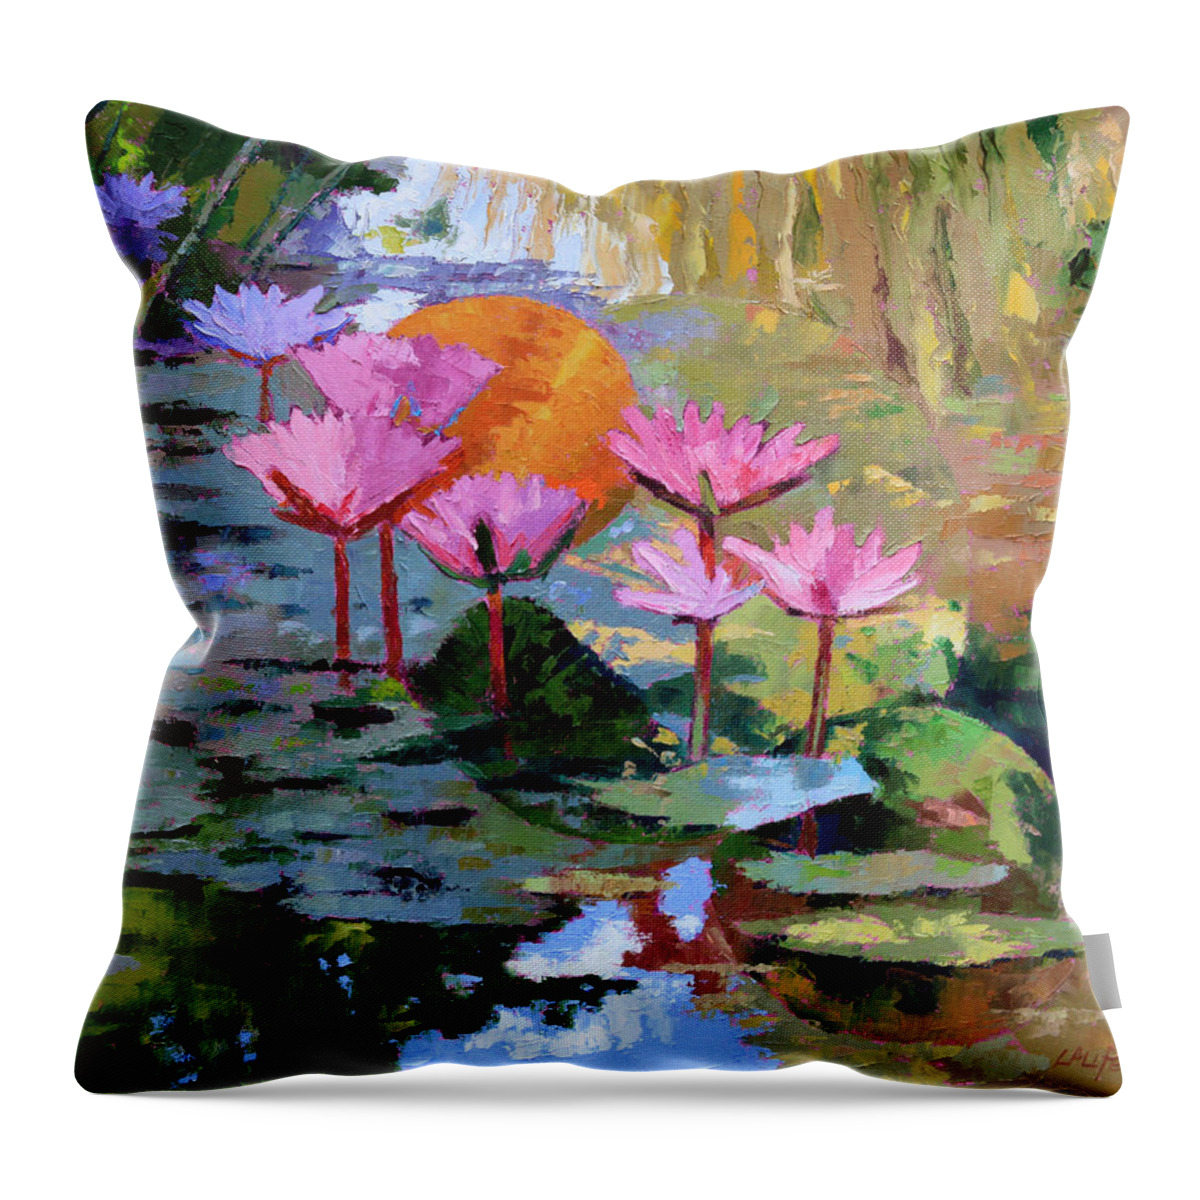 Water Lilies Throw Pillow featuring the painting It Is Only A Dream by John Lautermilch